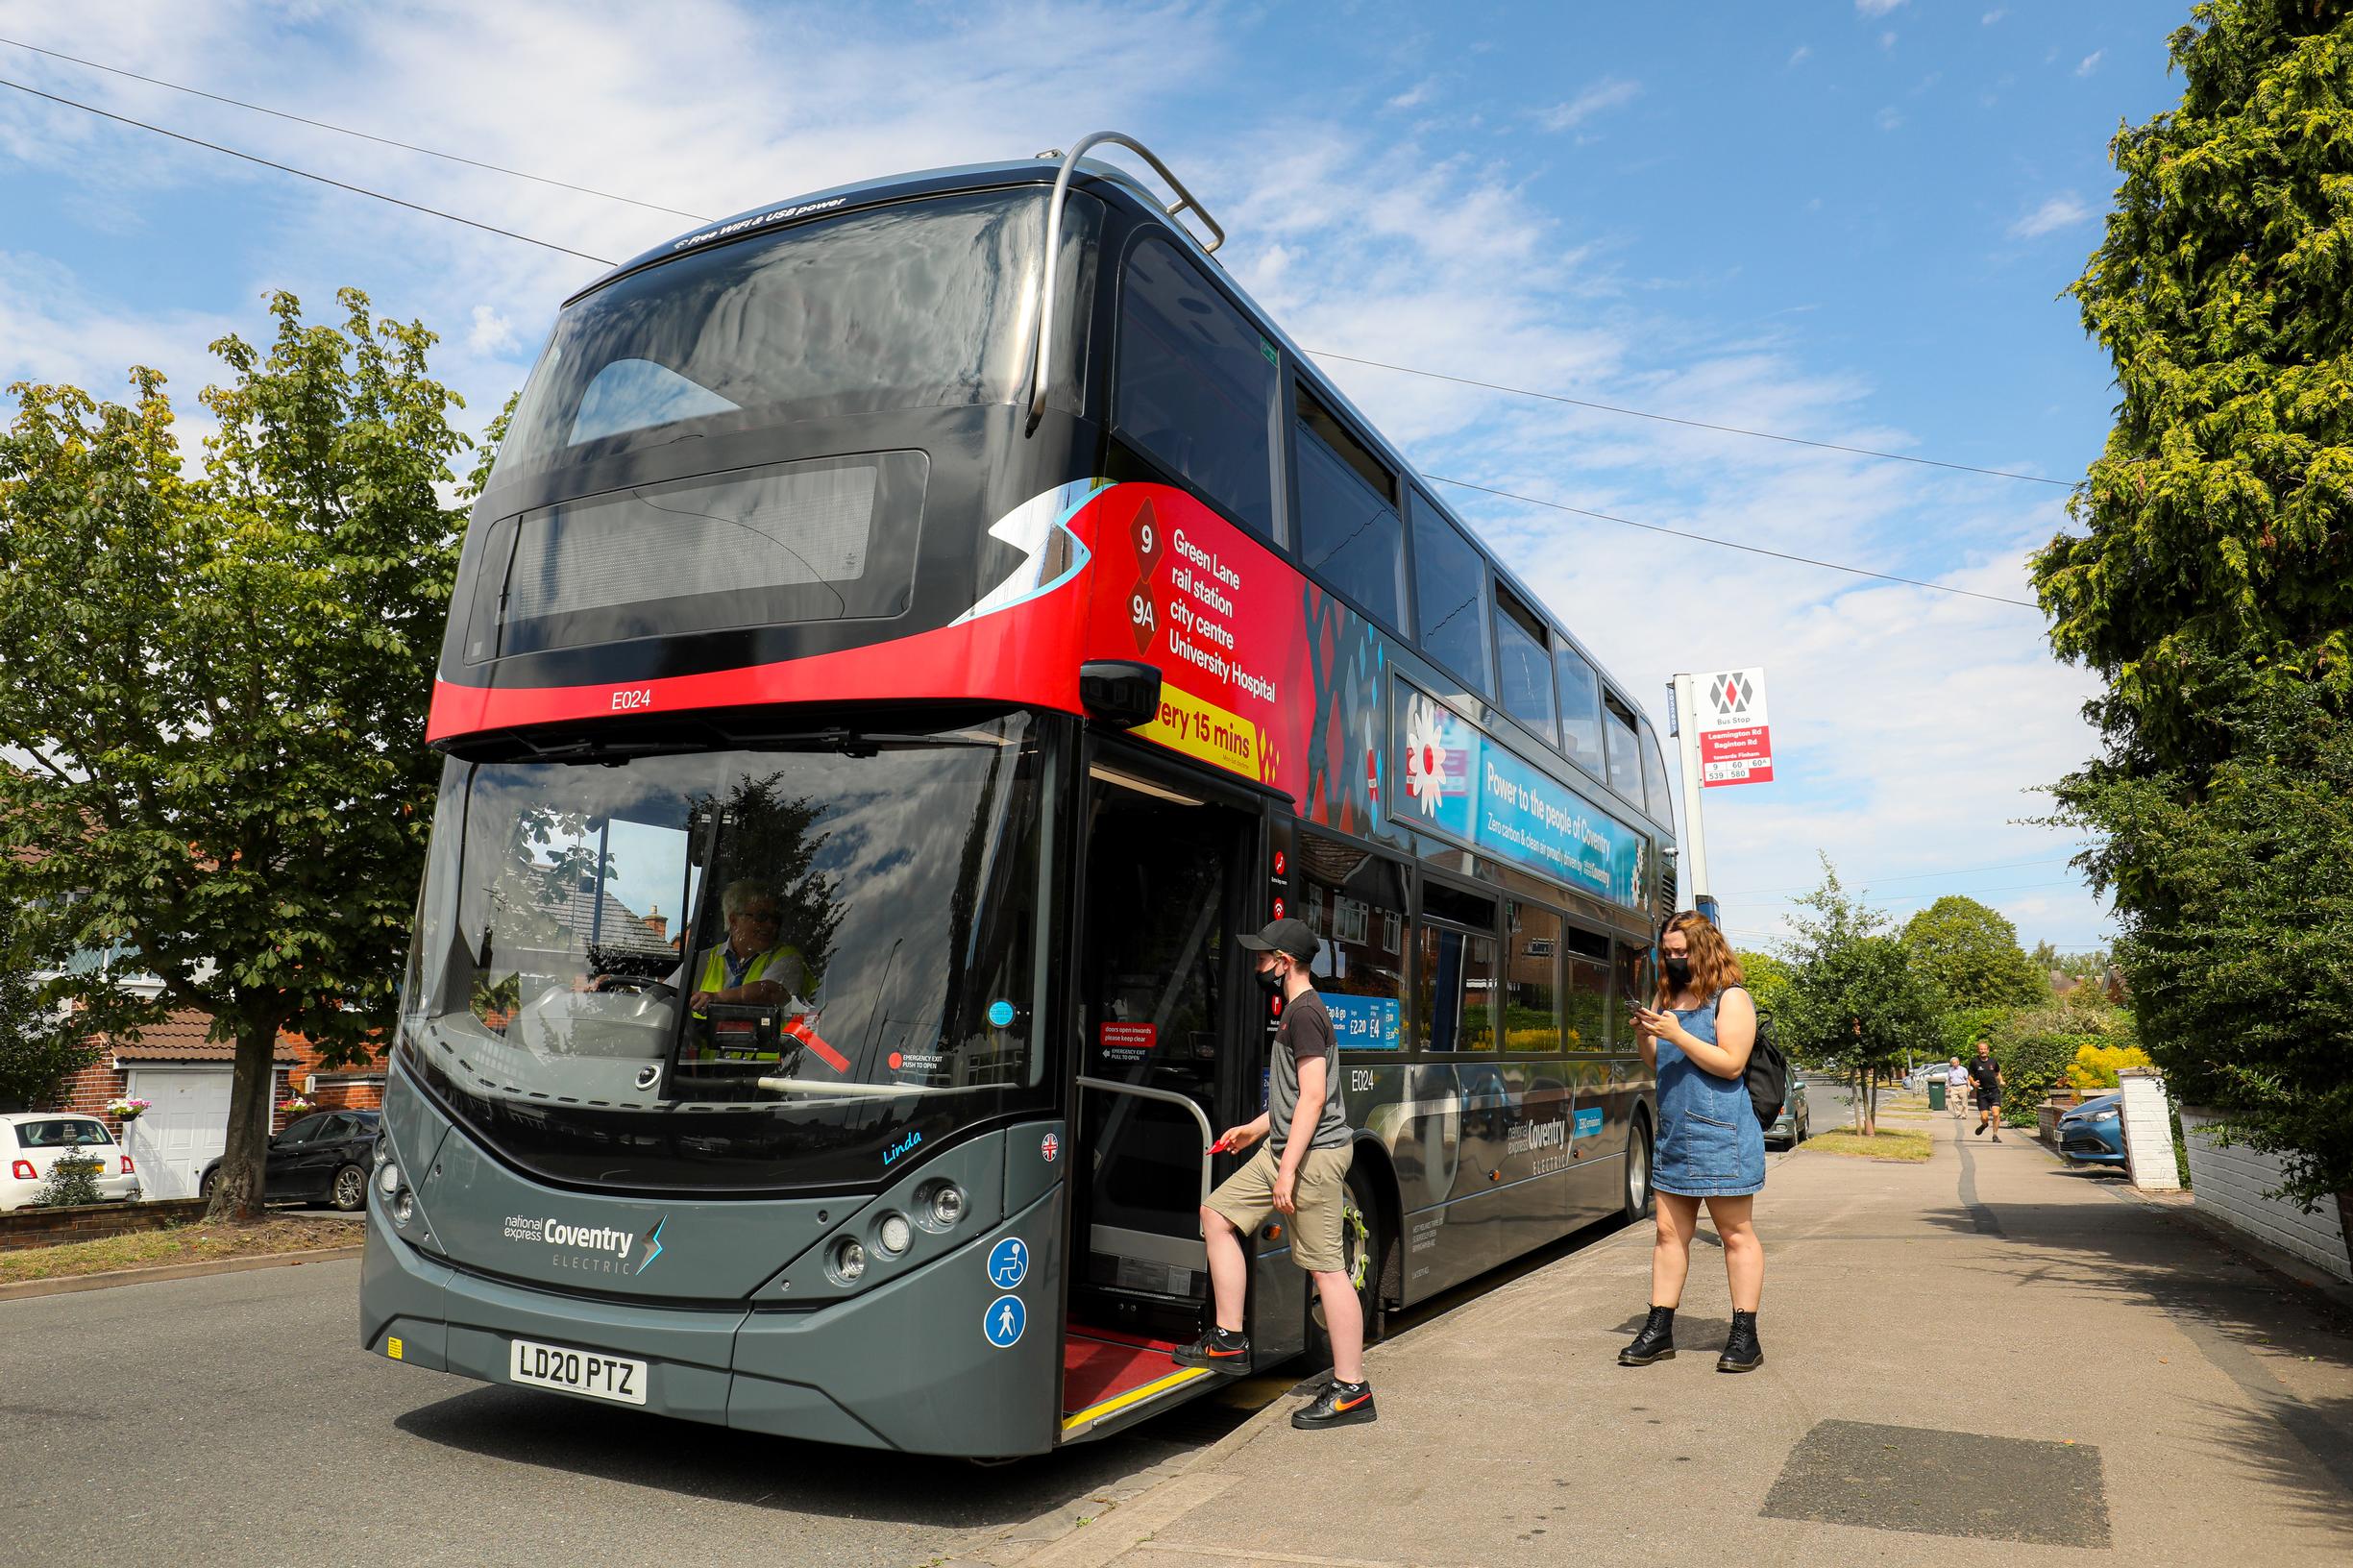 Alexander Dennis Limited (ADL) and BYD UK will supply 130 zero emission double deck buses to EV fleet and battery storage specialist Zenobe and bus operator National Express in Coventry